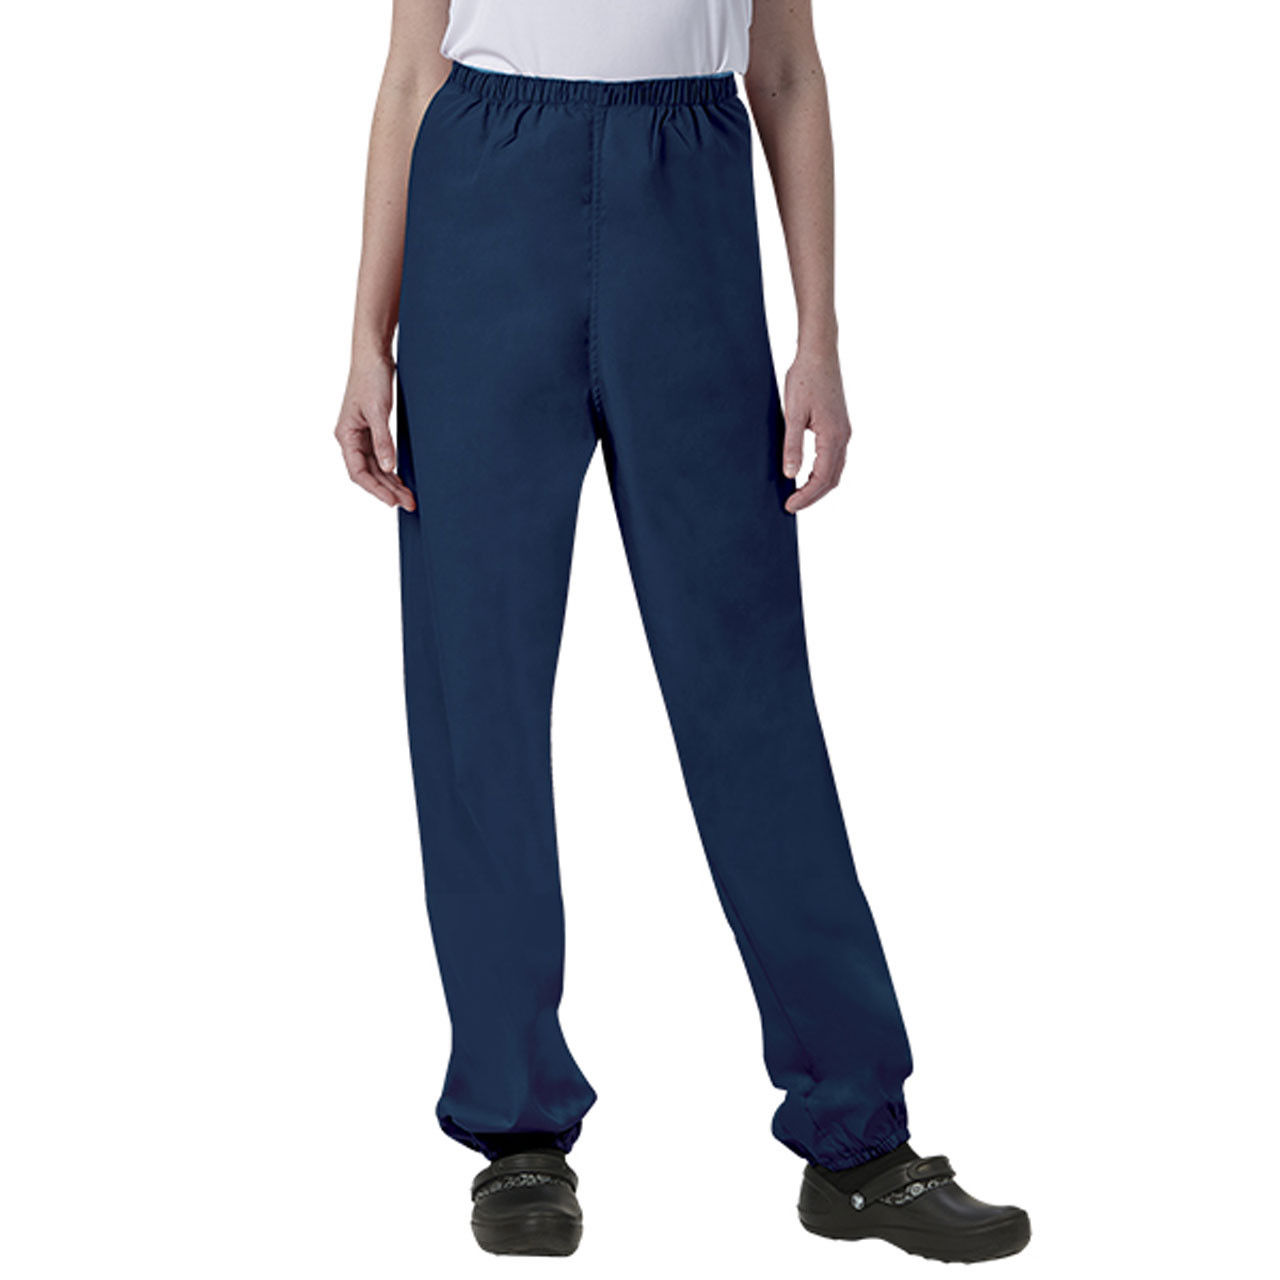 Do these Fashion Seal scrub pants have what type of waistband?